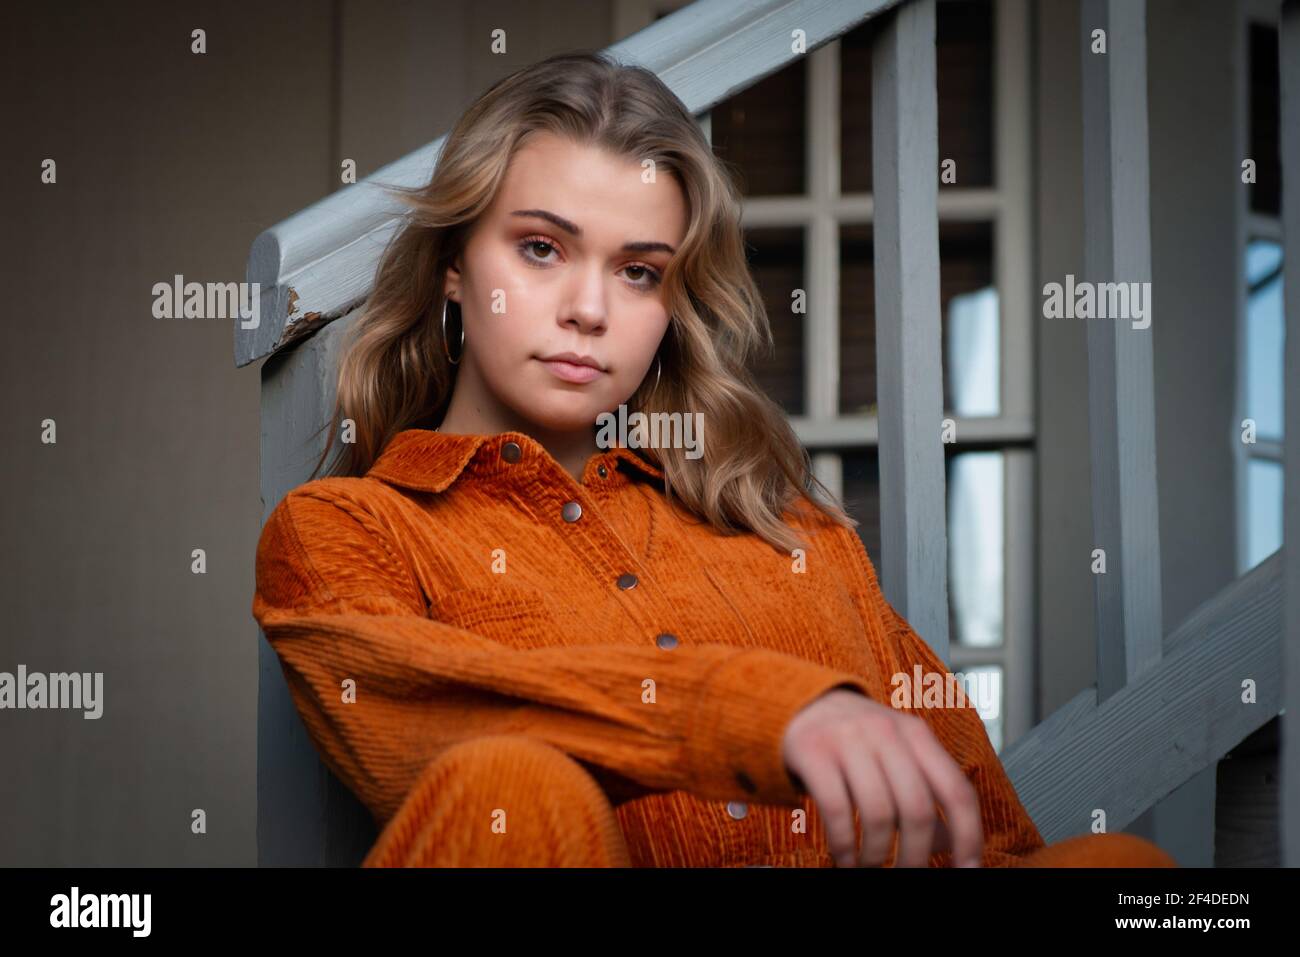 Portrait of a beautiful young woman sitting on a staircase in a hallway Stock Photo